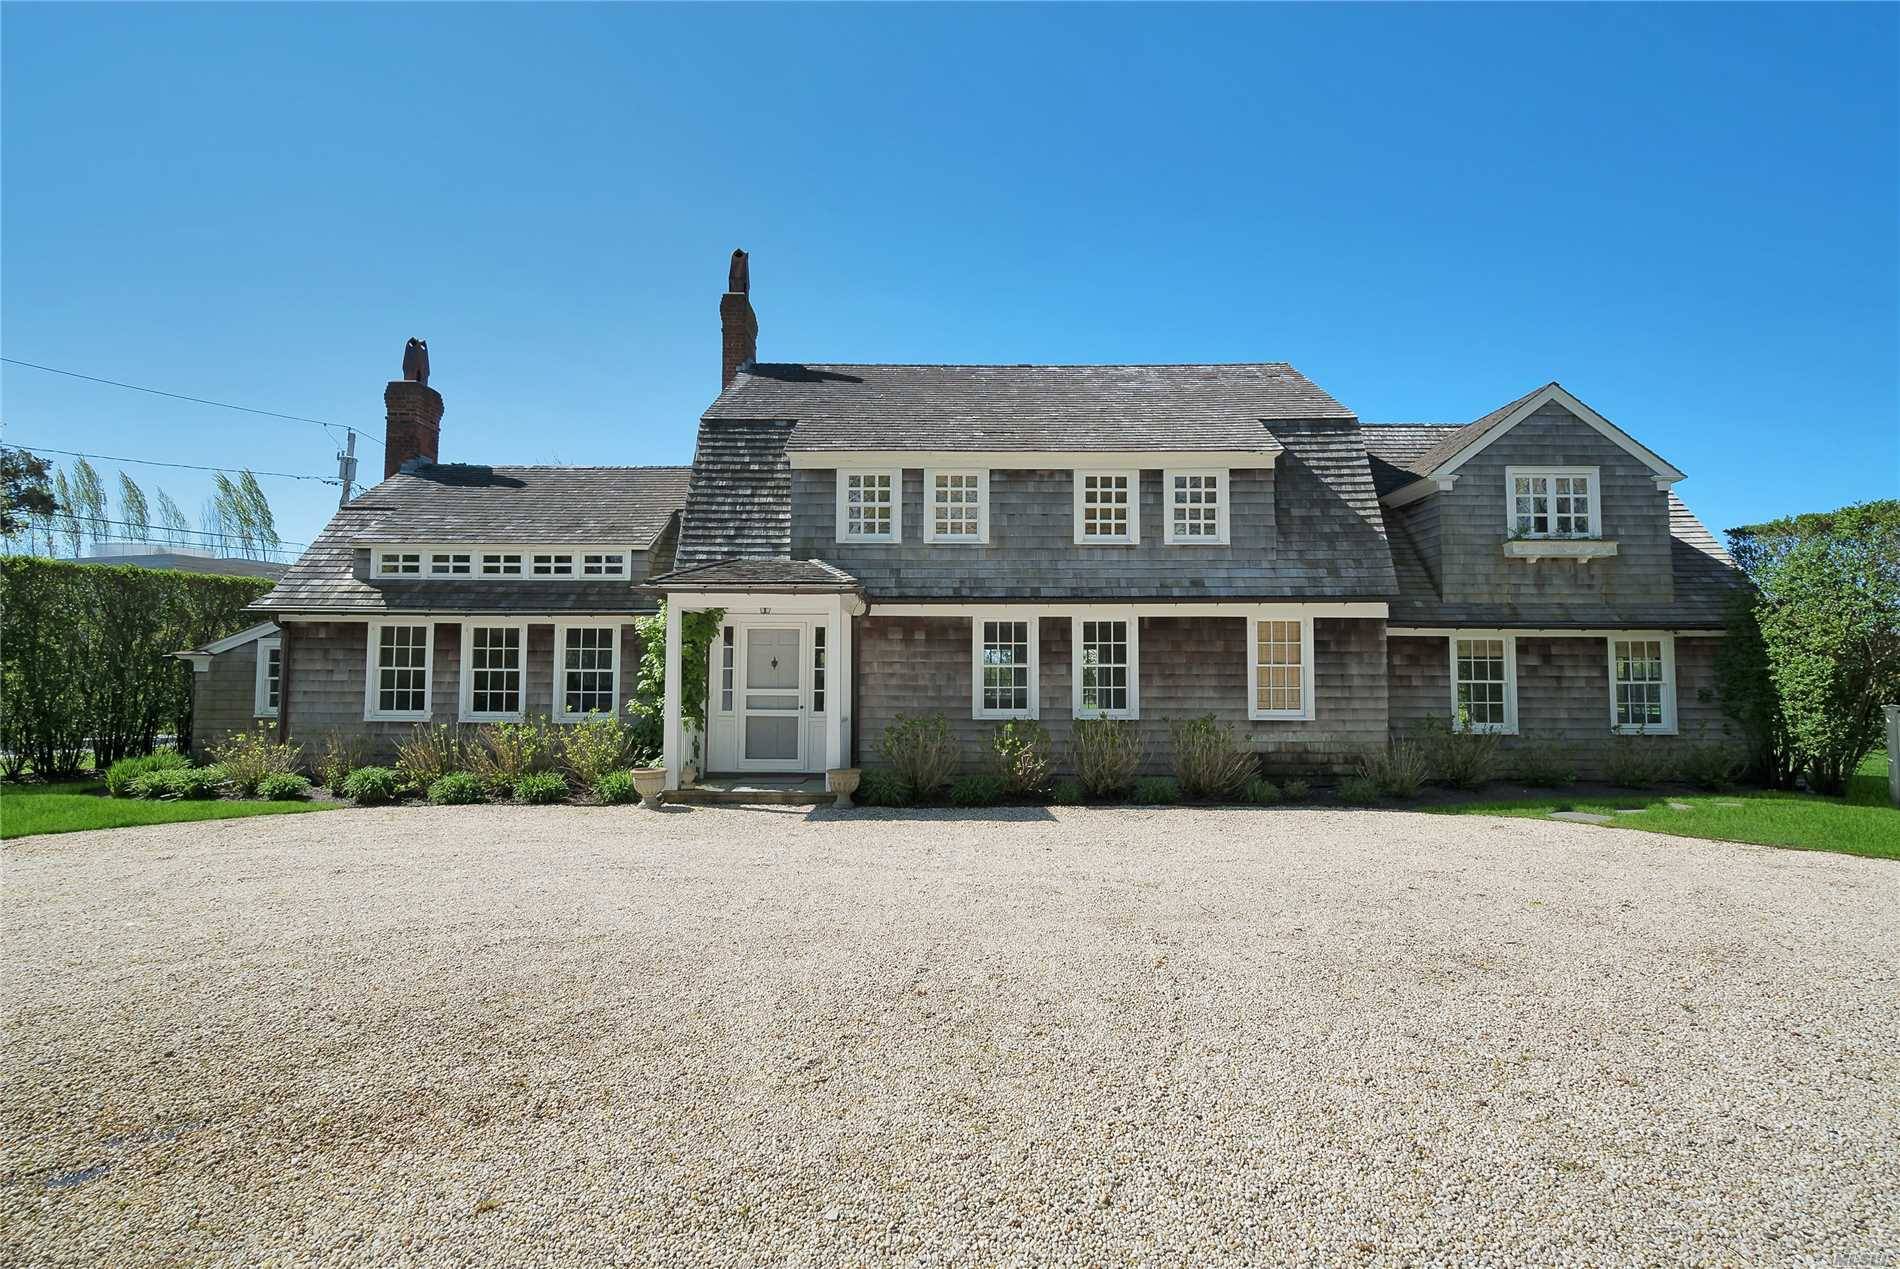 Contemporized home from yesteryear in South Quogue offered for sale since its complete stylish renovation.